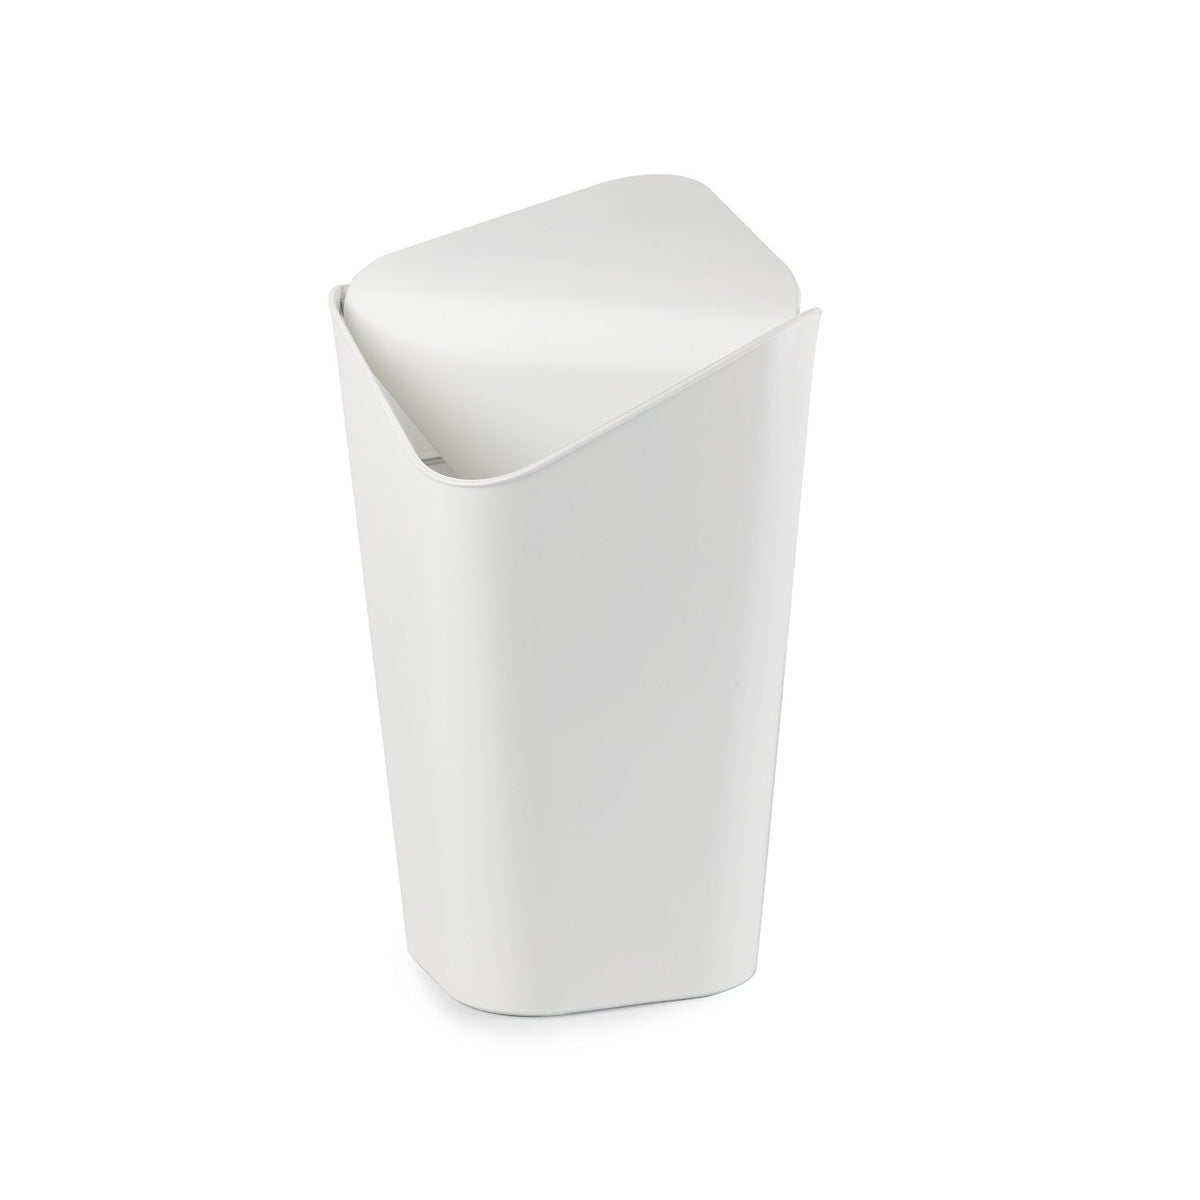 Buy umbra corner waste can - Online store for trash & recycling, trash cans in USA, on sale, low price, discount deals, coupon code